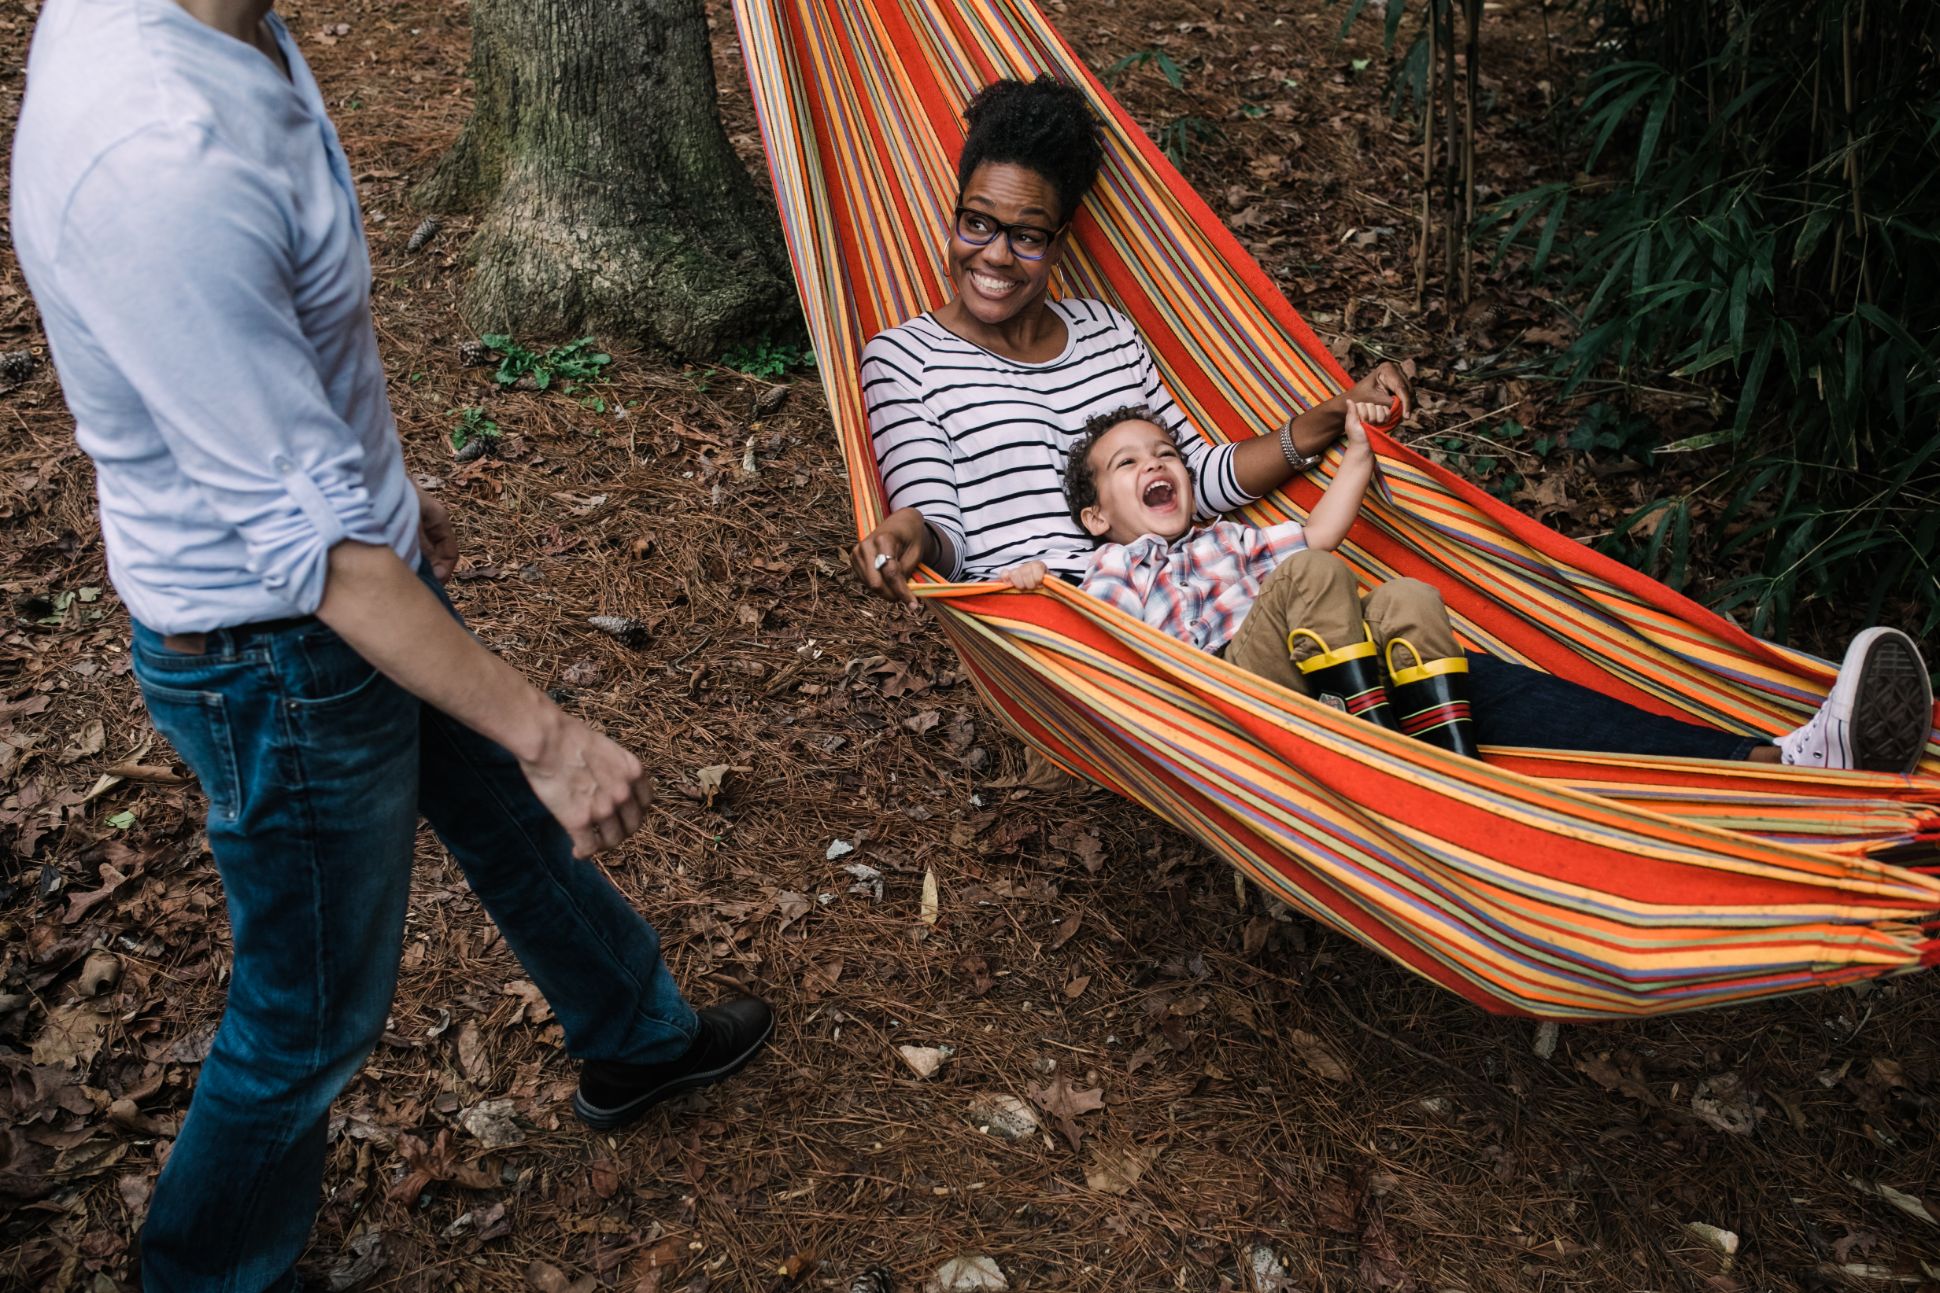 Mother and son smiling in a hammock outside.